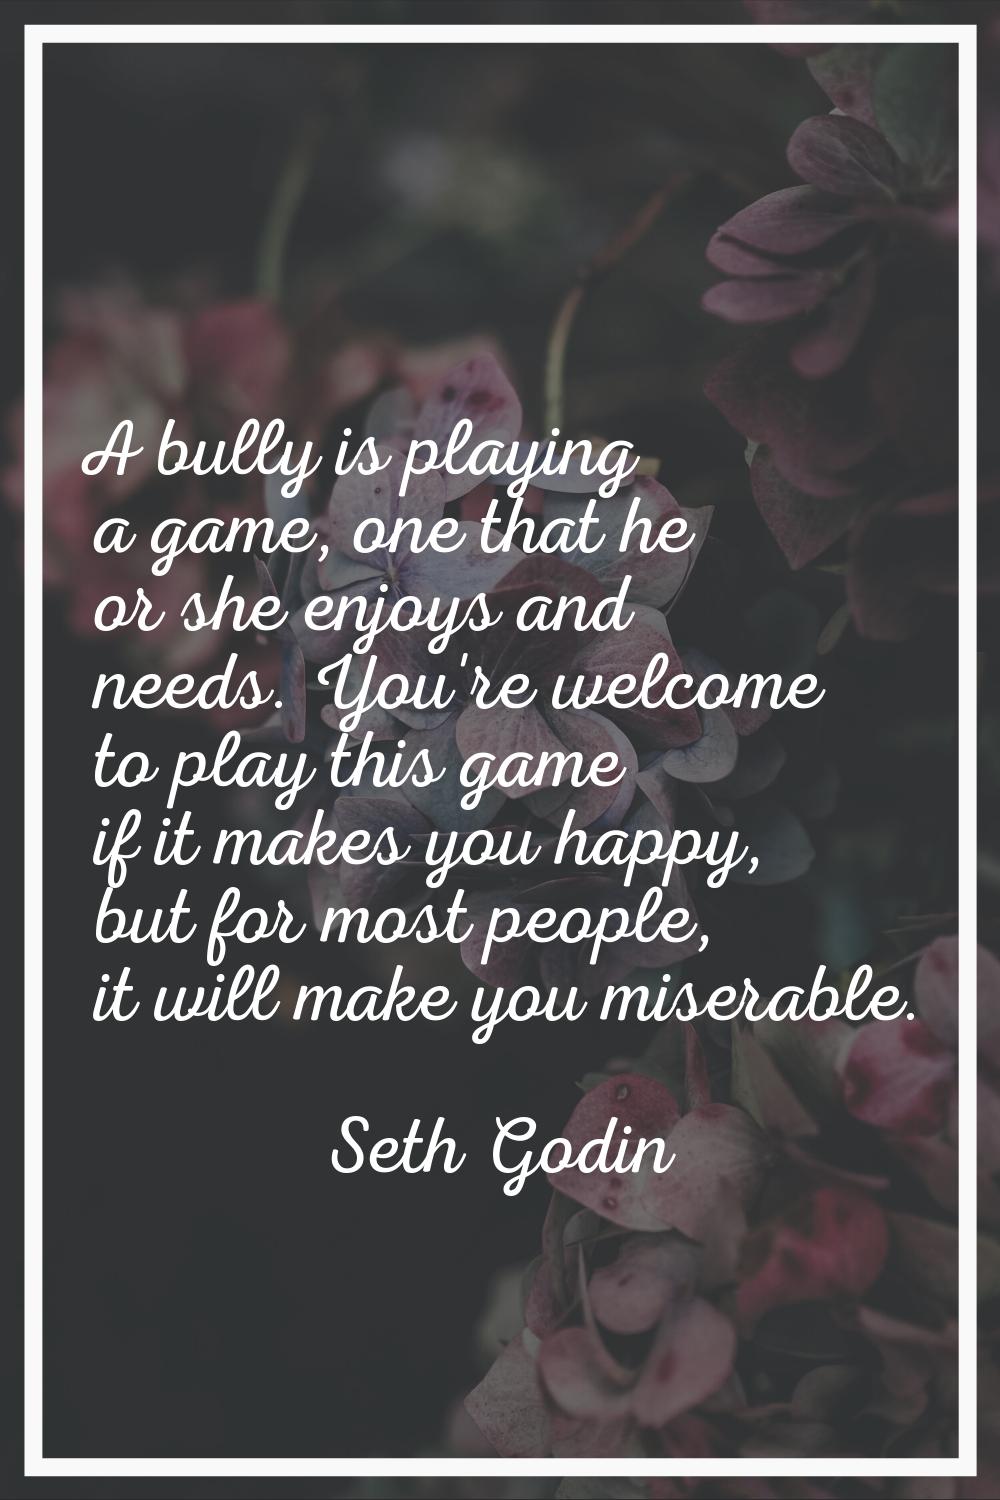 A bully is playing a game, one that he or she enjoys and needs. You're welcome to play this game if